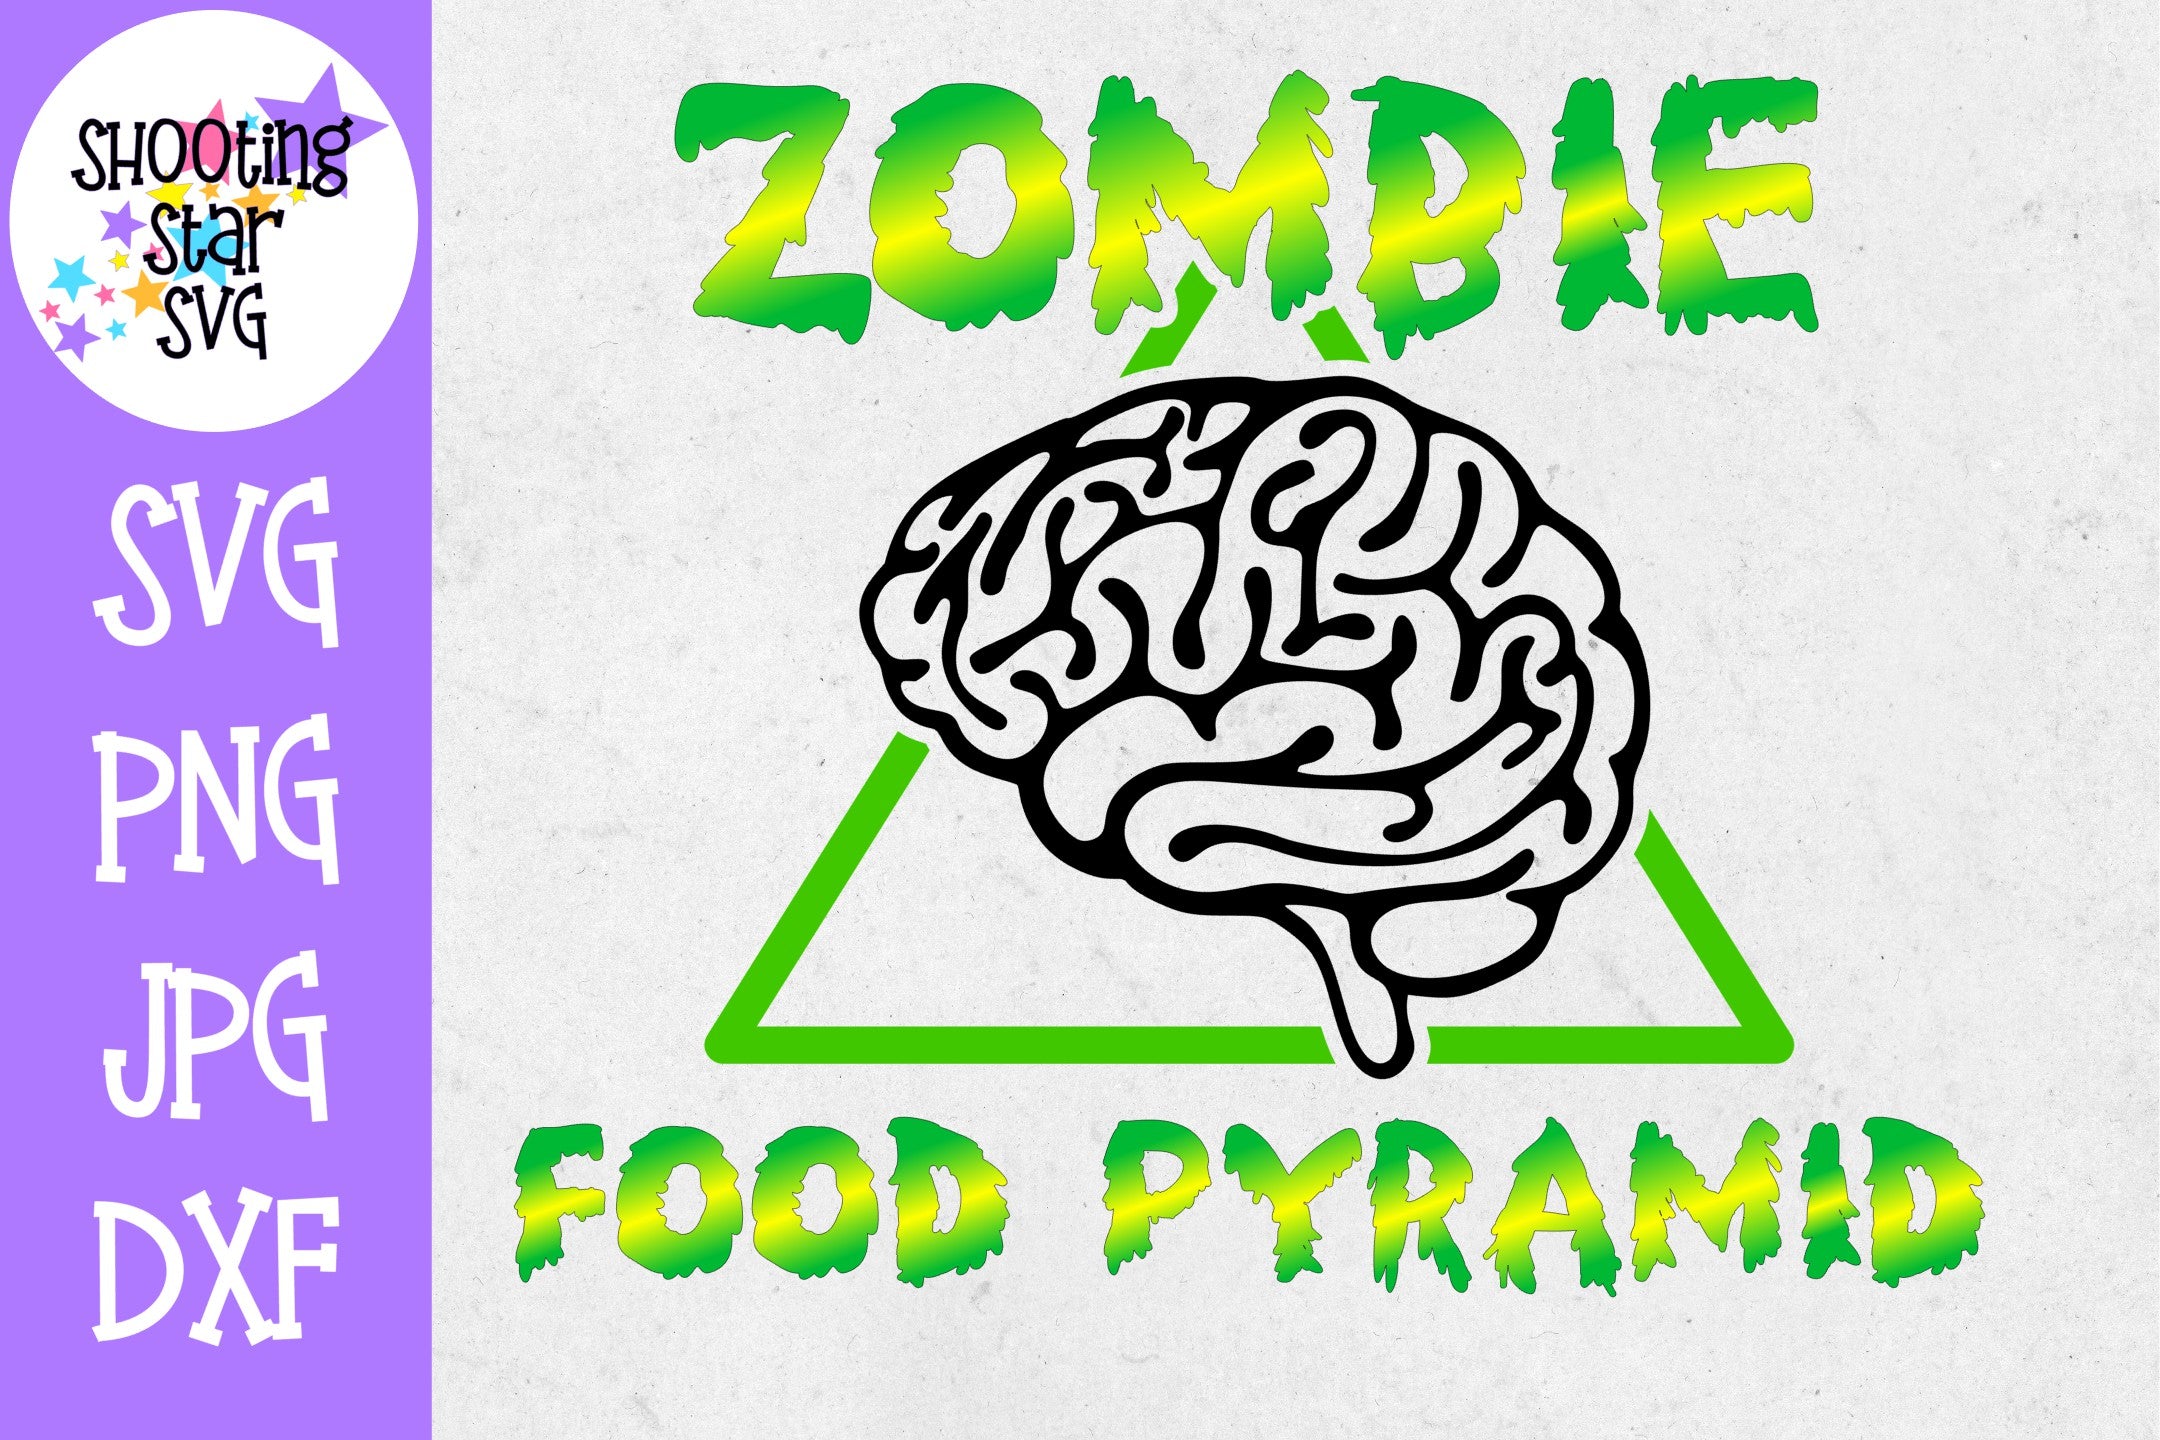 Zombies Eat Brains You're Safe SVG - Zombie - Halloween SVG